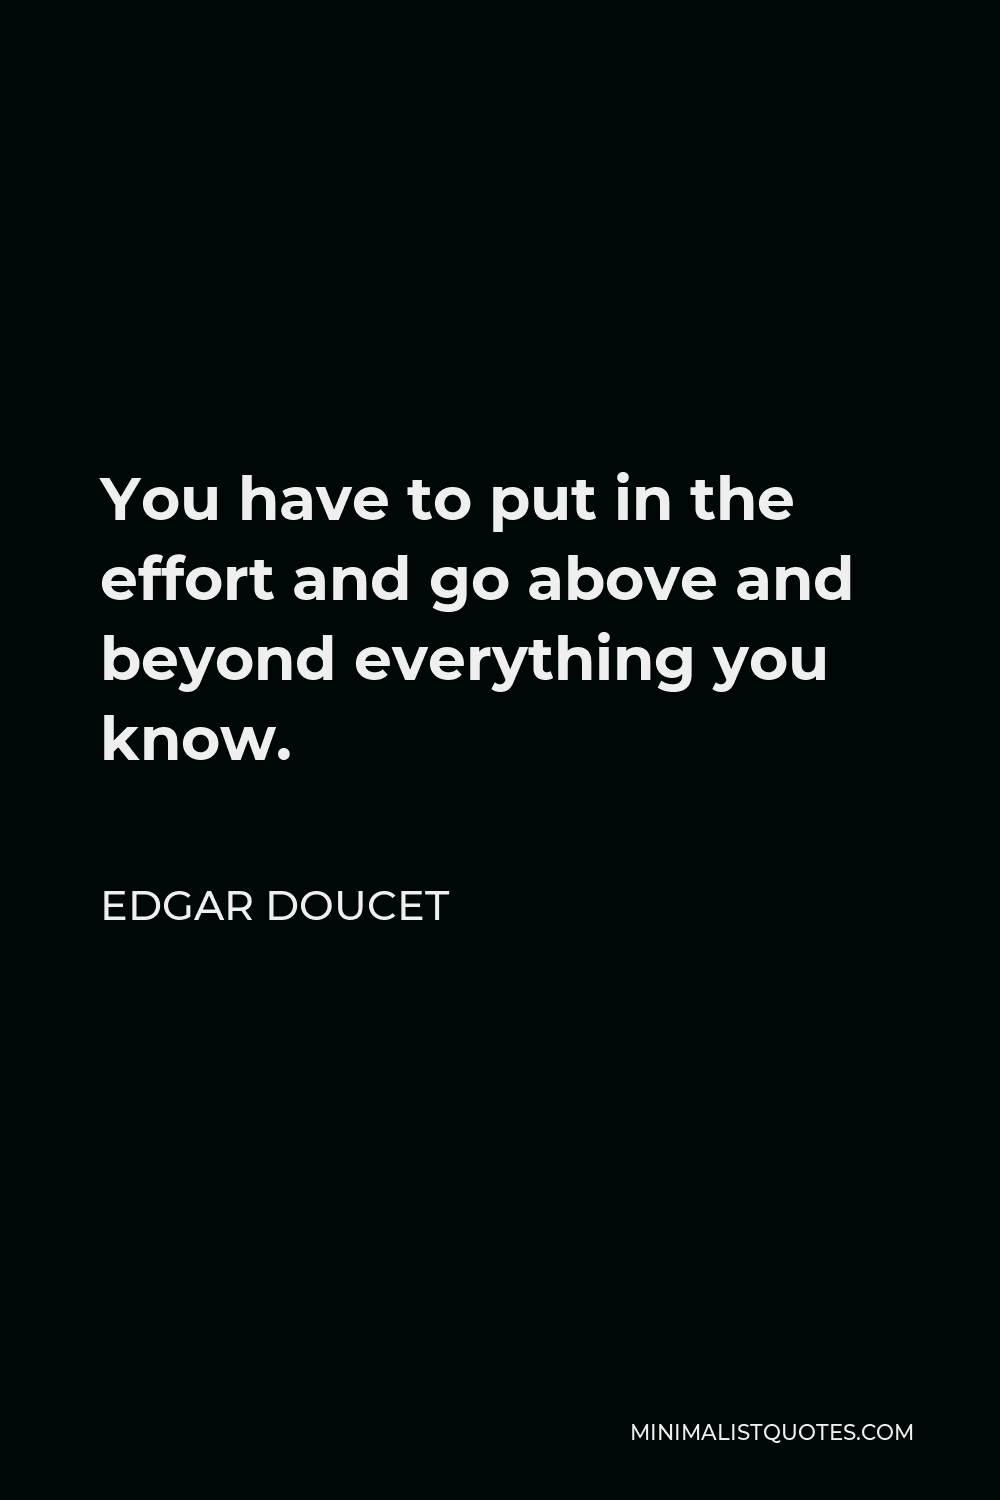 Edgar Doucet Quote - You have to put in the effort and go above and beyond everything you know.